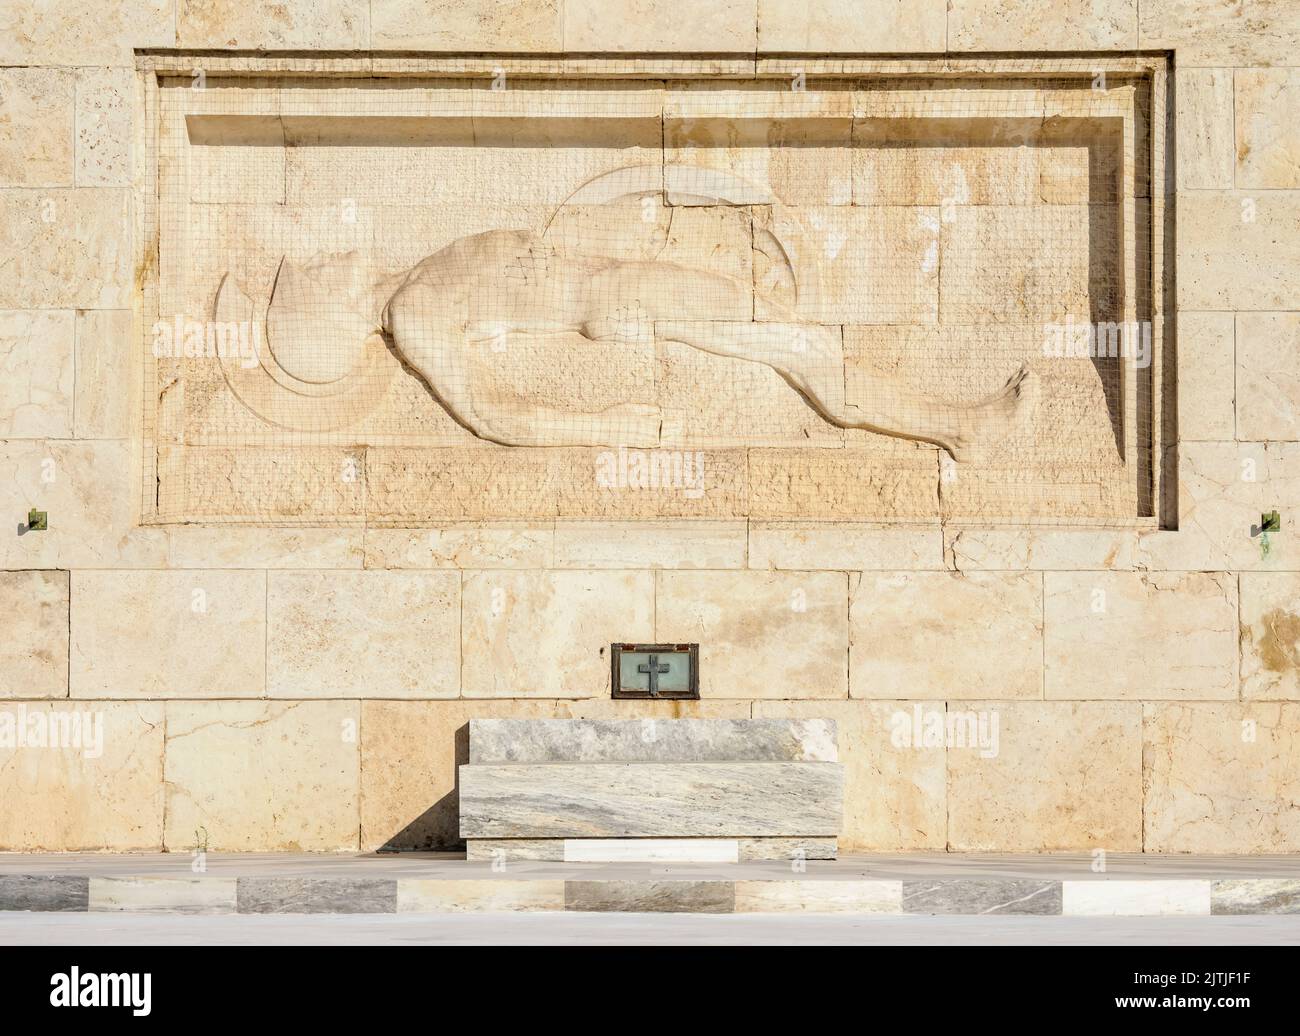 Monument to the Unknown Soldier, Syntagma Square, Athens, Attica, Greece Stock Photo